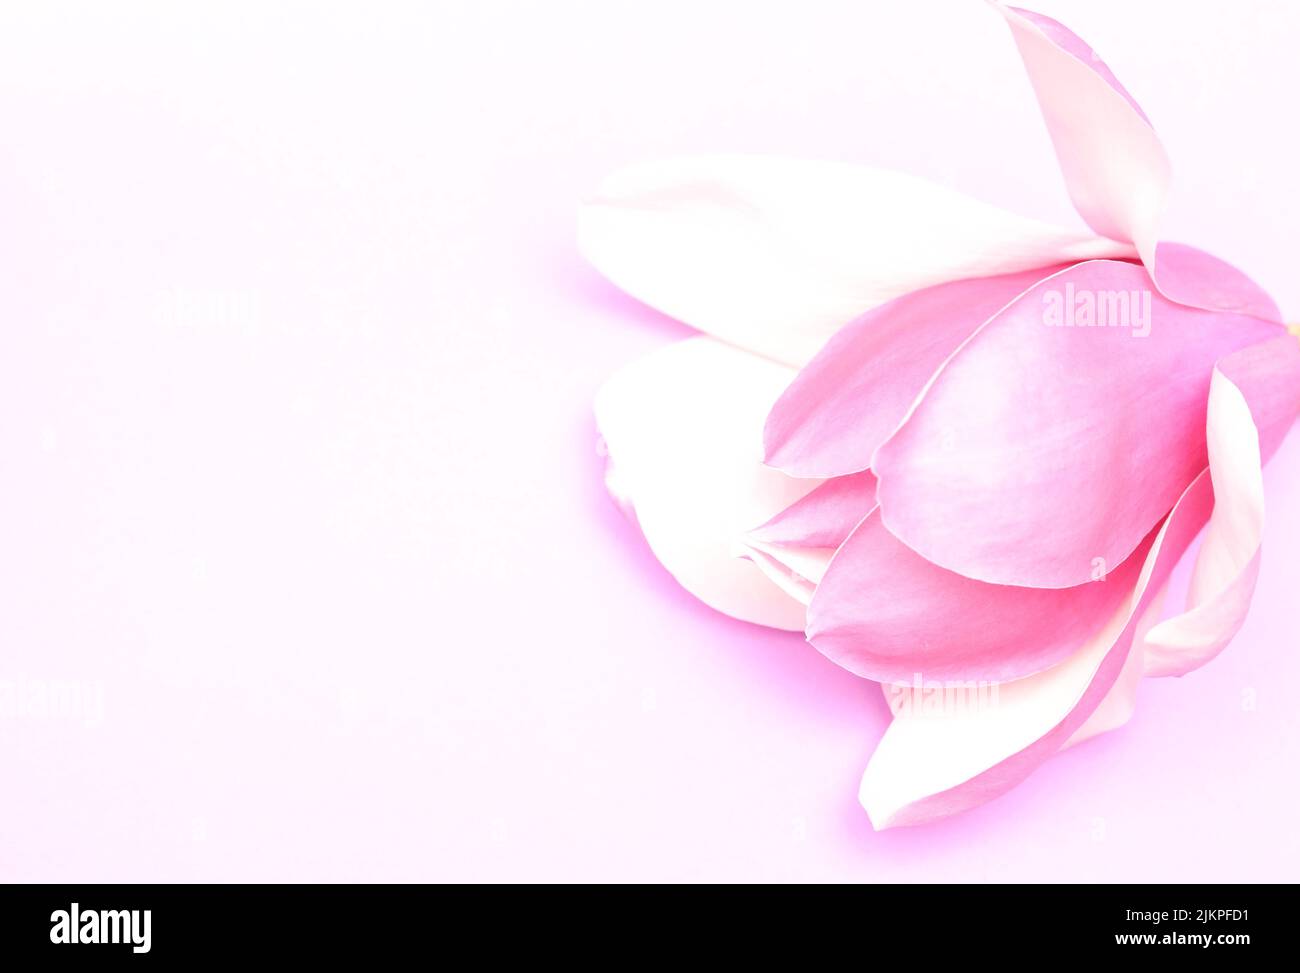 Deliberately over exposed, blown out pink pruple magnolia flower and petals against a light pale background. Illustrative style monochromatic image Stock Photo